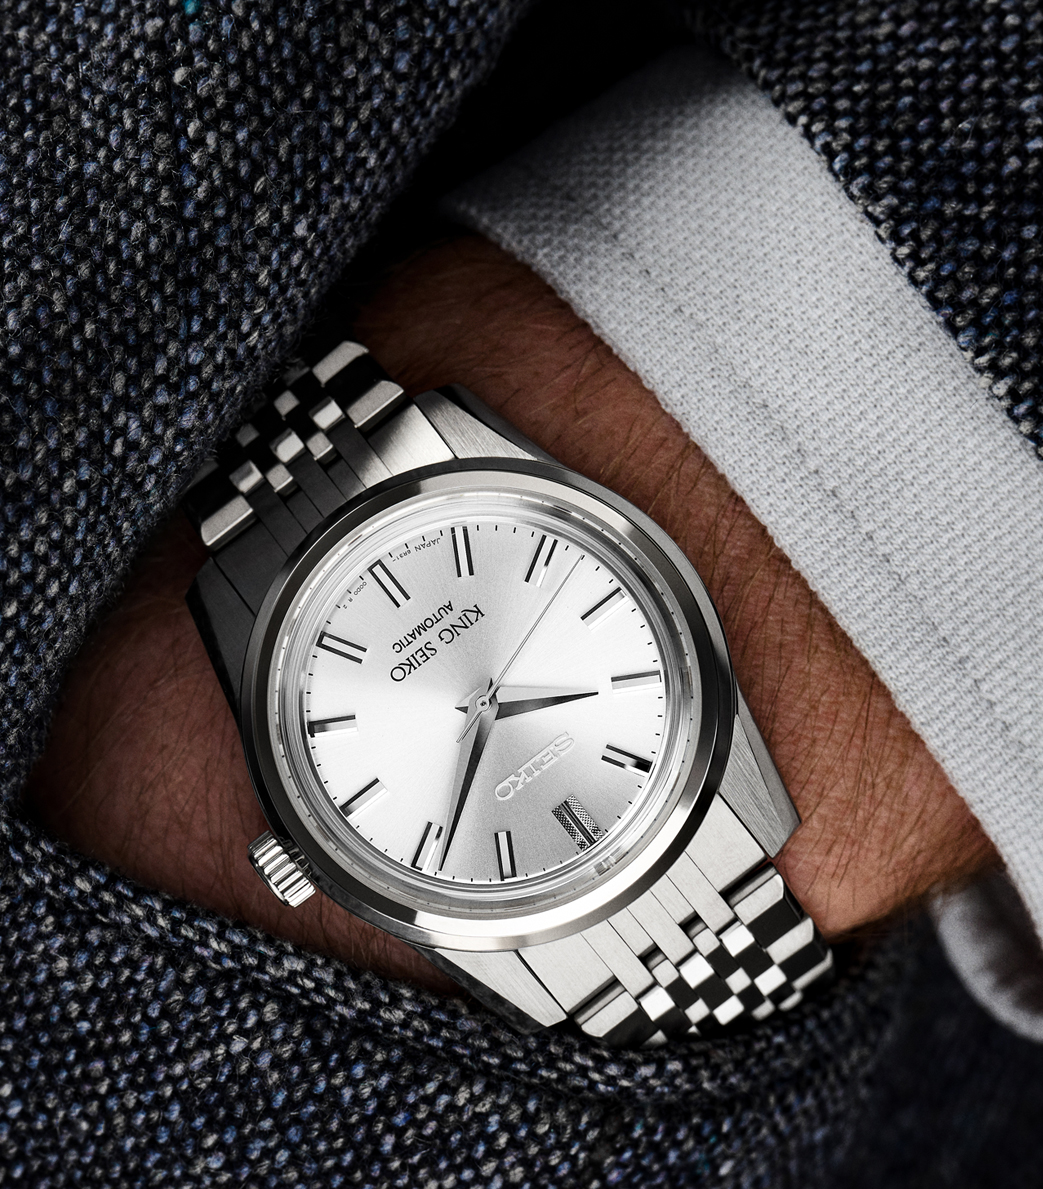 Seiko | The Official UK Online Store